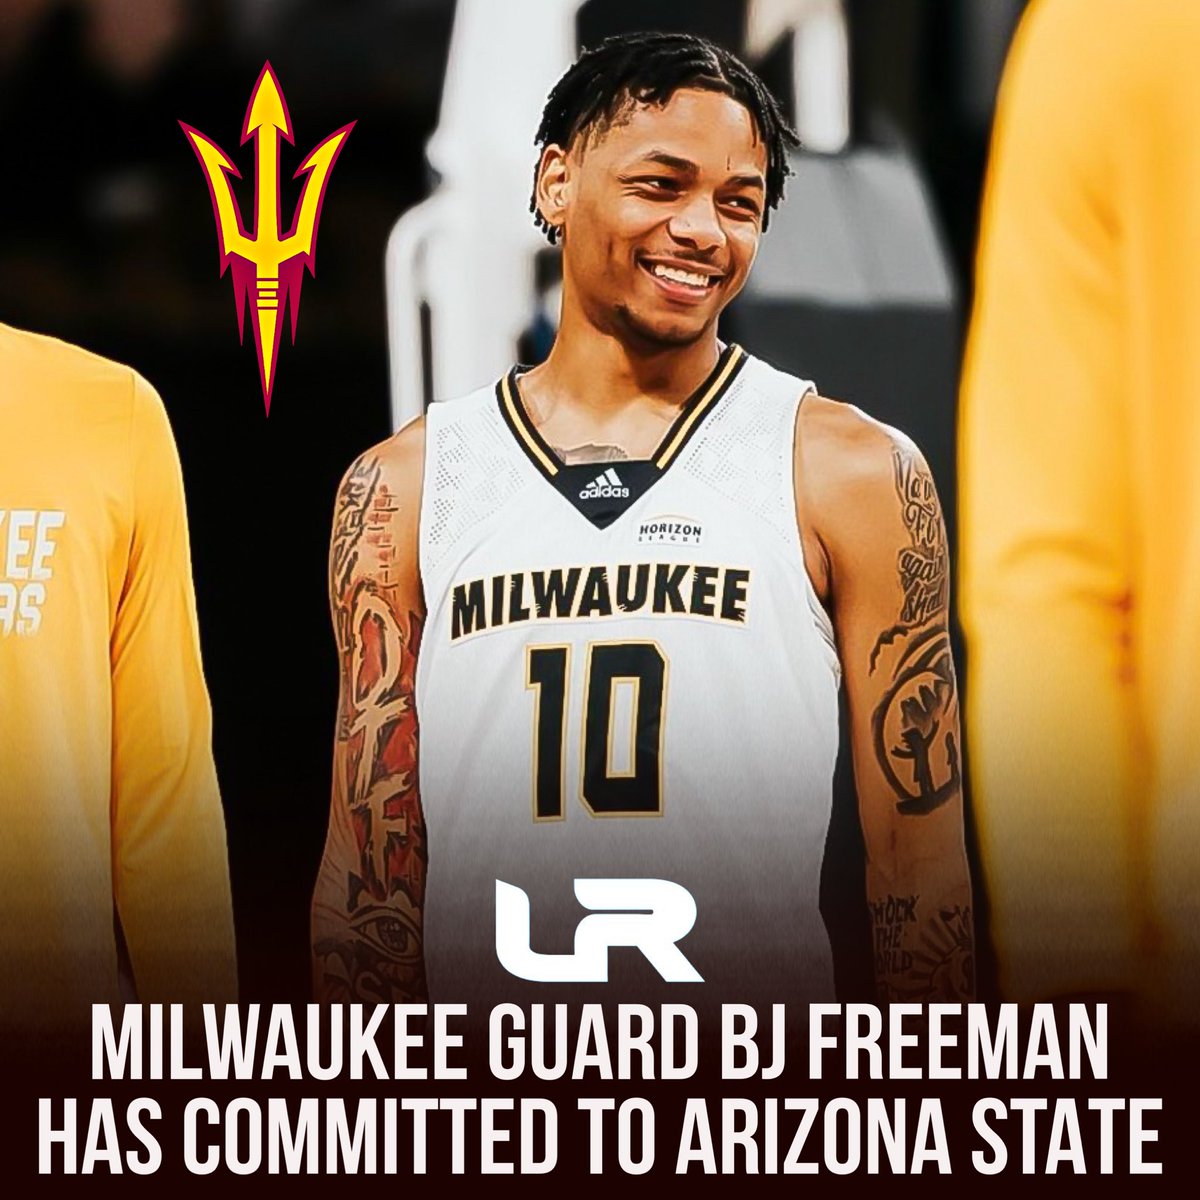 NEWS: UW-Milwaukee transfer BJ Freeman has committed to Arizona State, sources told @LeagueRDY. Freeman began his career playing one season at Dodge City CC before playing the last two at Milwaukee. Was All-Horizon League Second Team this season. He averaged 21.1PPG, 6.6RPG,